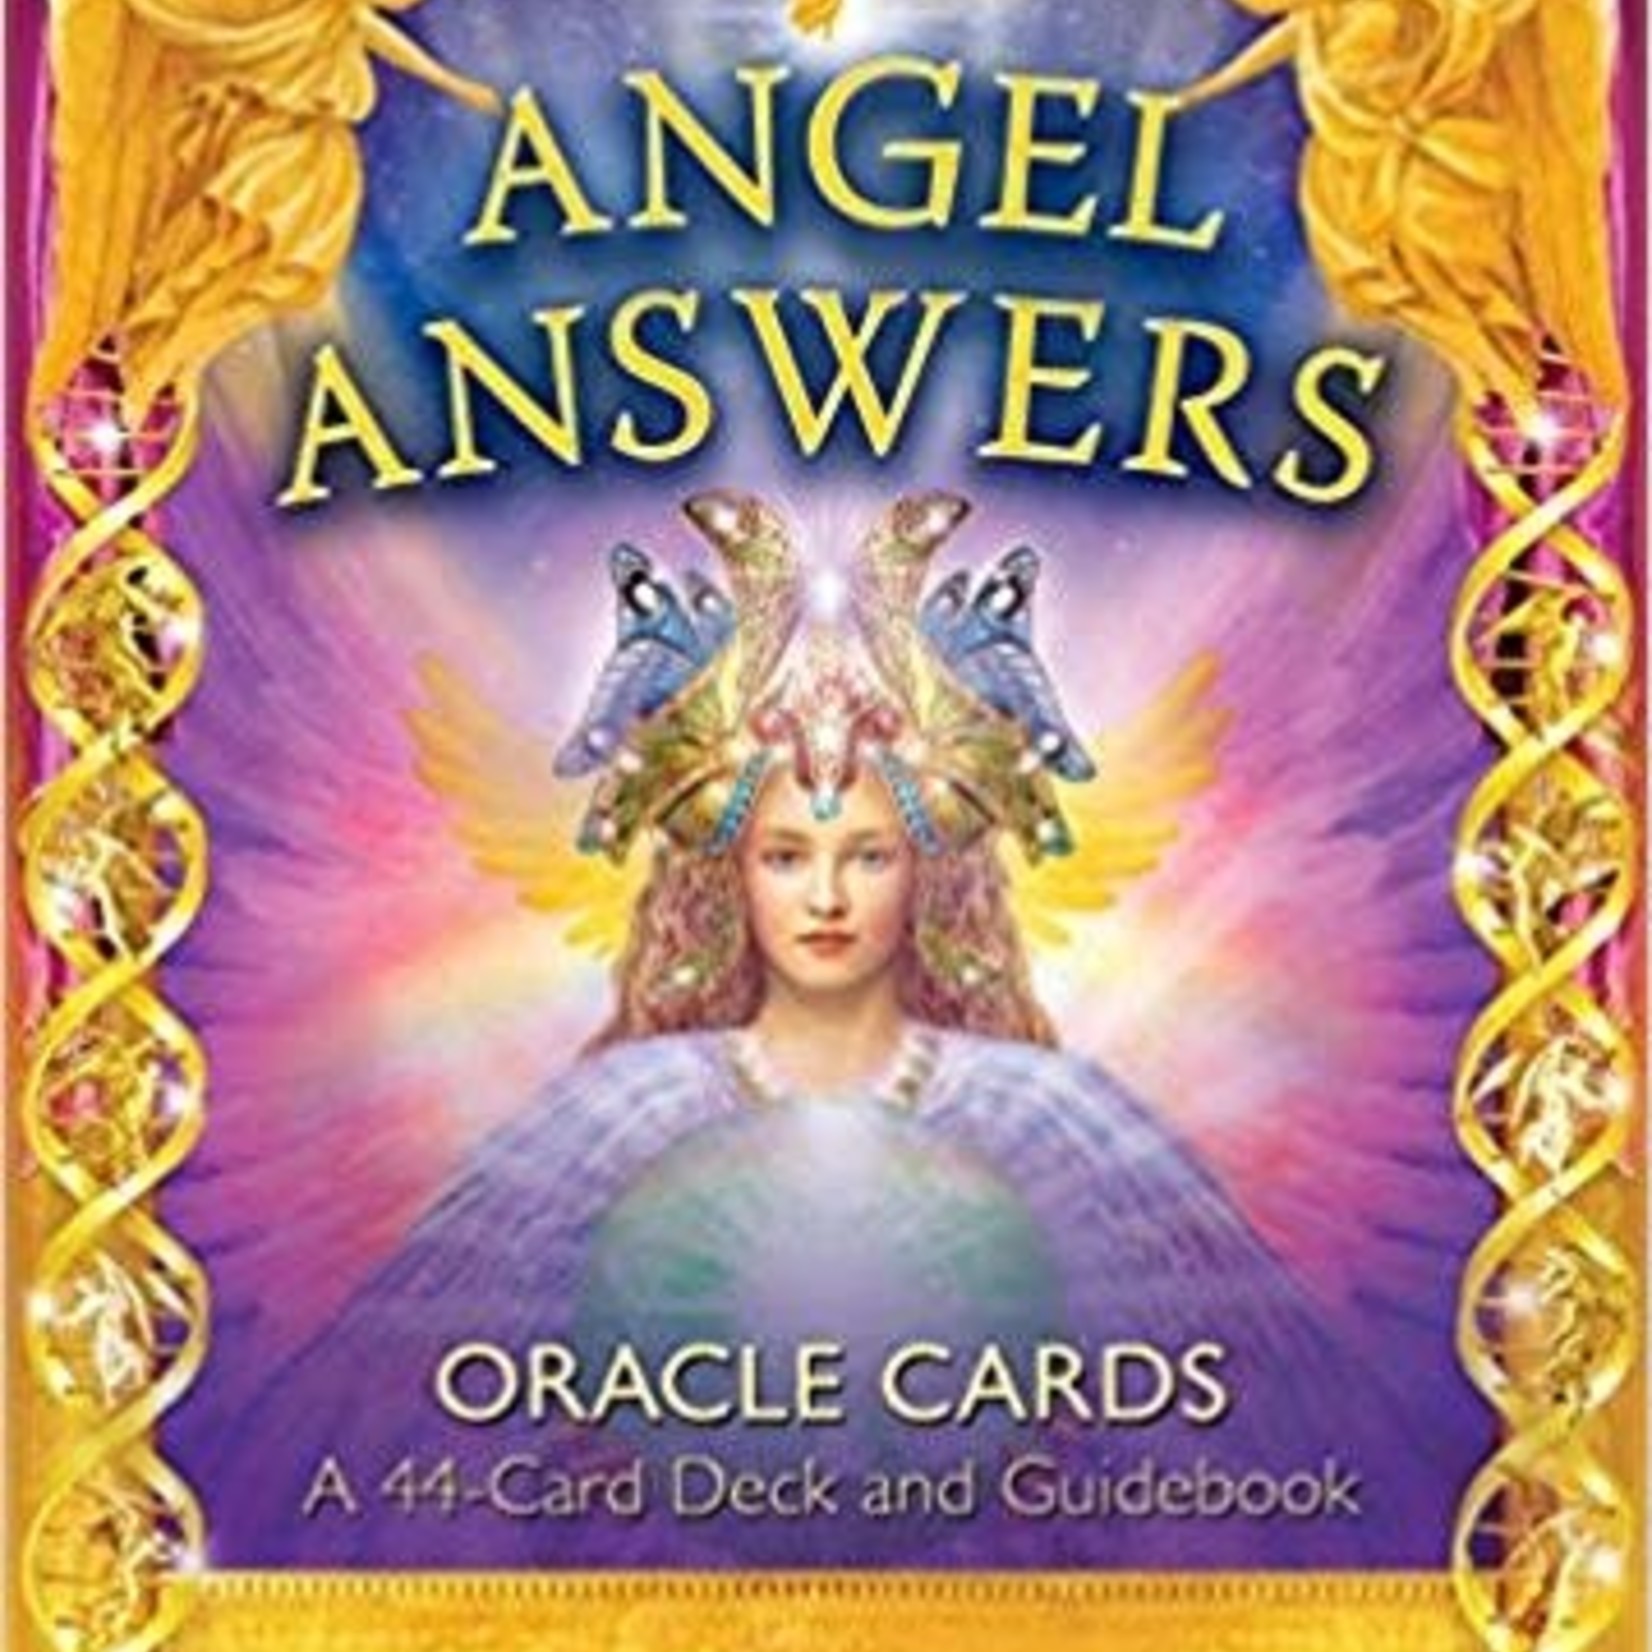 Angel Answers Oracle Cards - 44 Card Deck & Guide Book